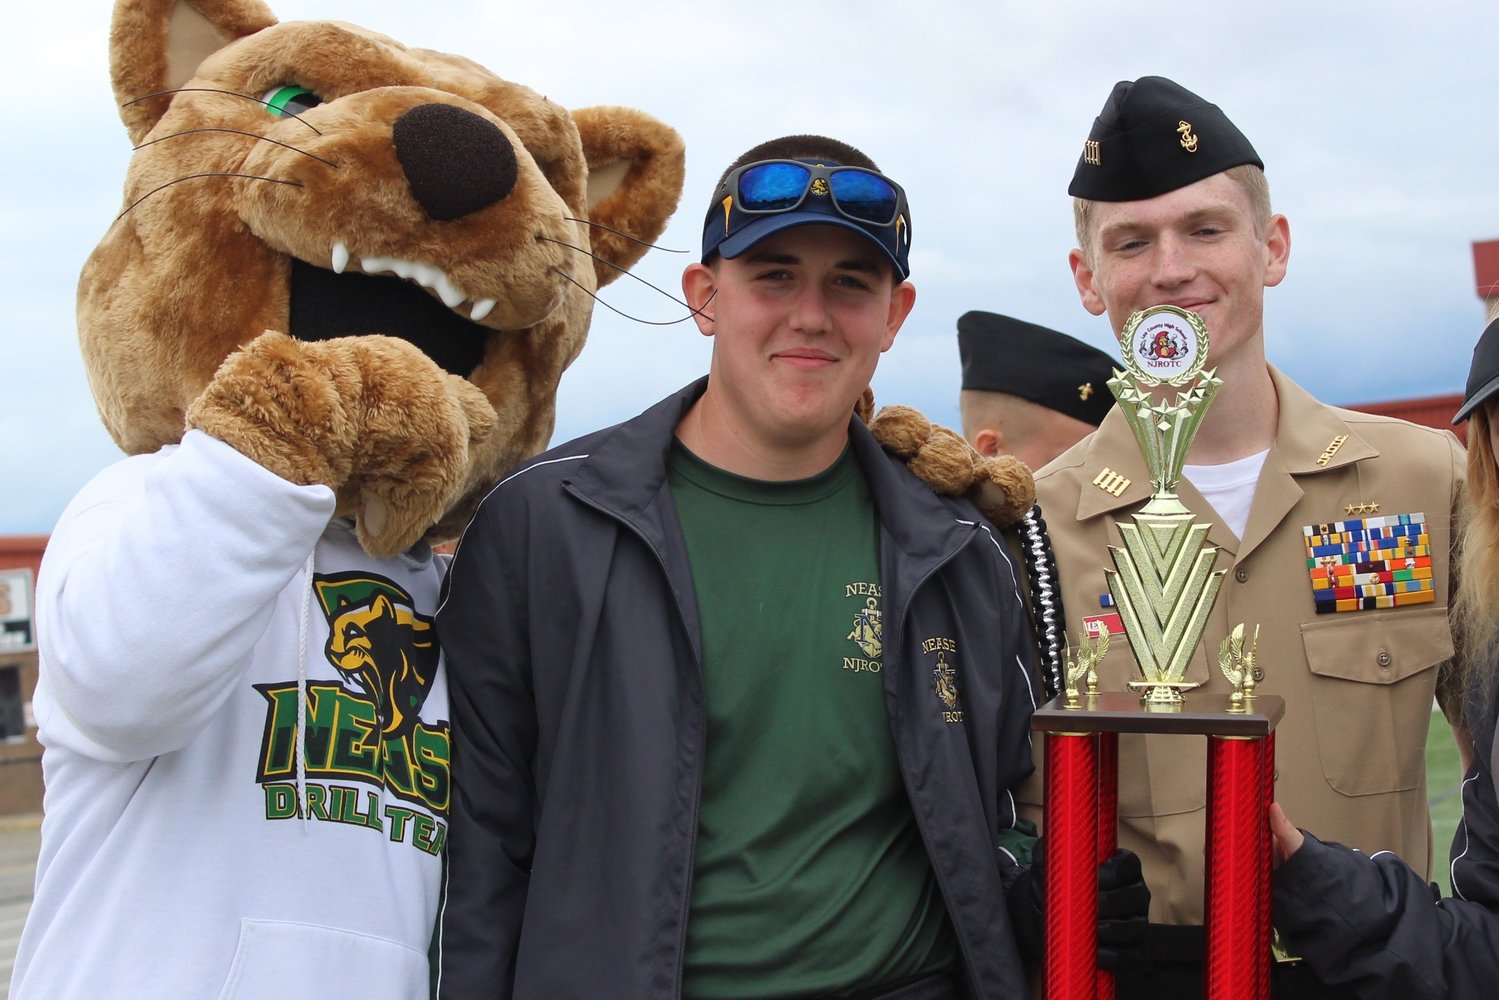 Cadet Ensign Ben Prohofsky accepts the first-place team academics trophy at the Lee County drill meet on Oct. 30. Prohofsky claimed top academic honors at two of the three competitions.